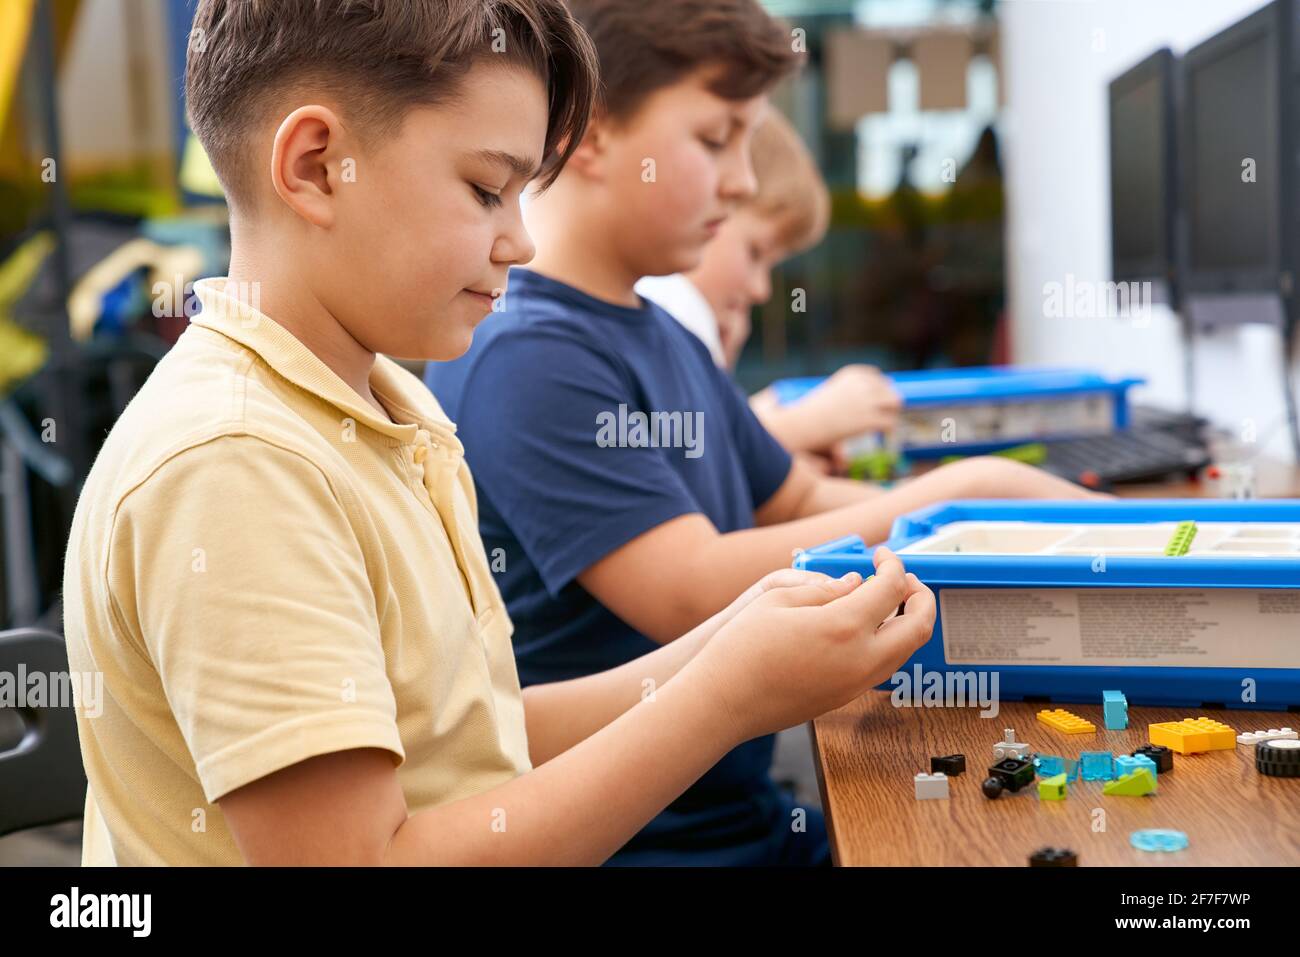 Interesting building kit for kids on table with computers. Side view of boys creating toys. Science engineering. Nice interested friends chatting and working on project together. Stock Photo